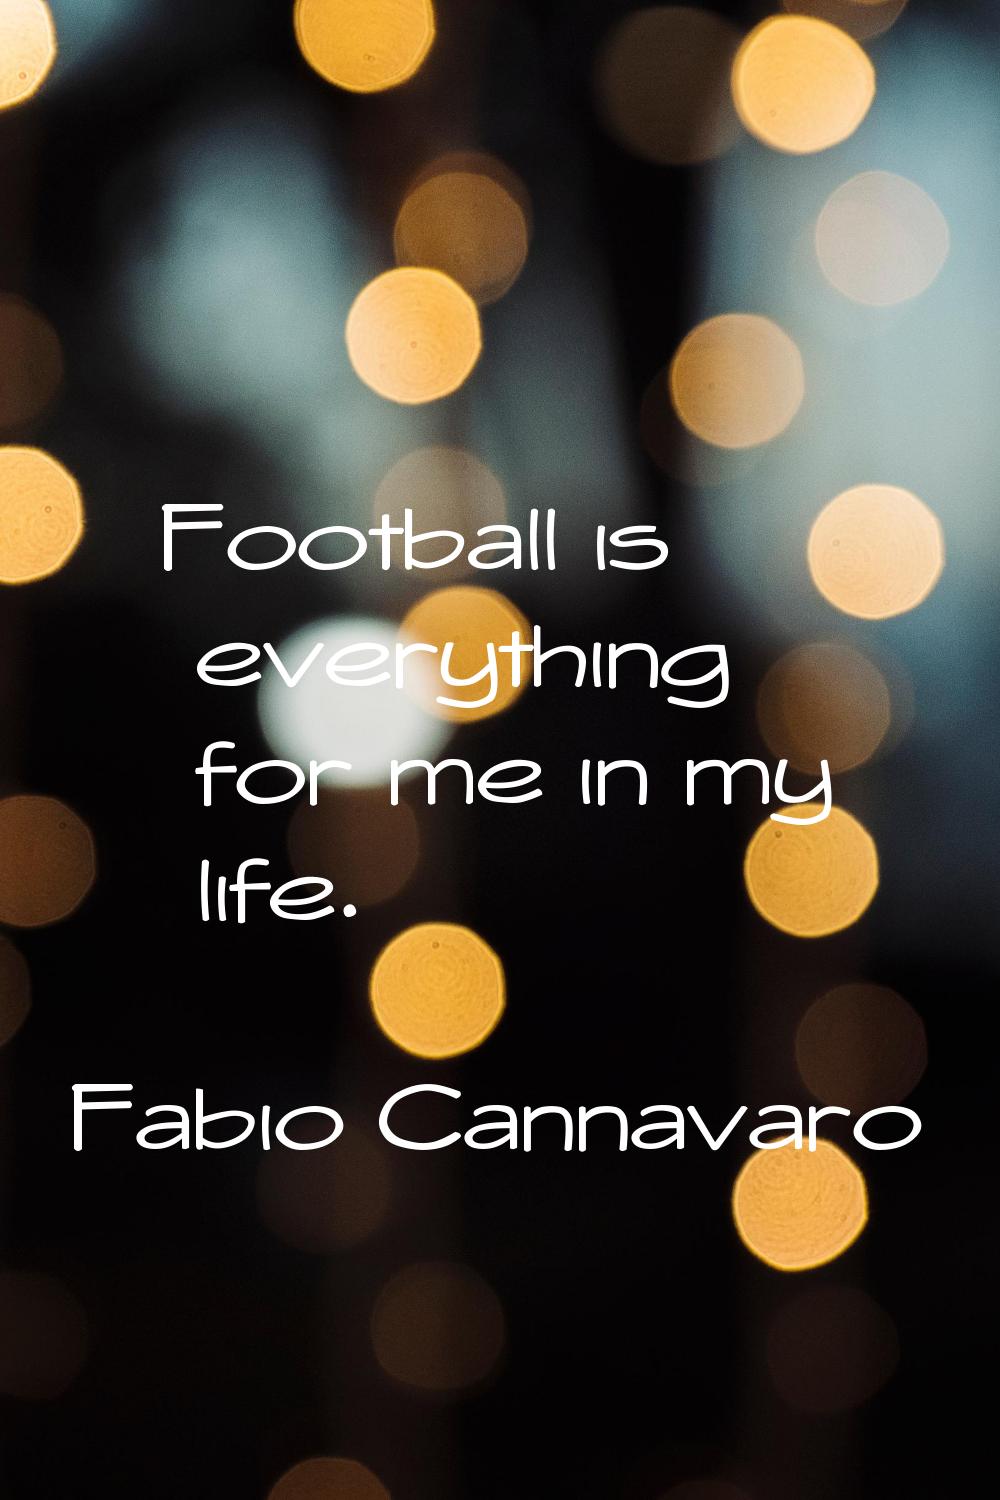 Football is everything for me in my life.